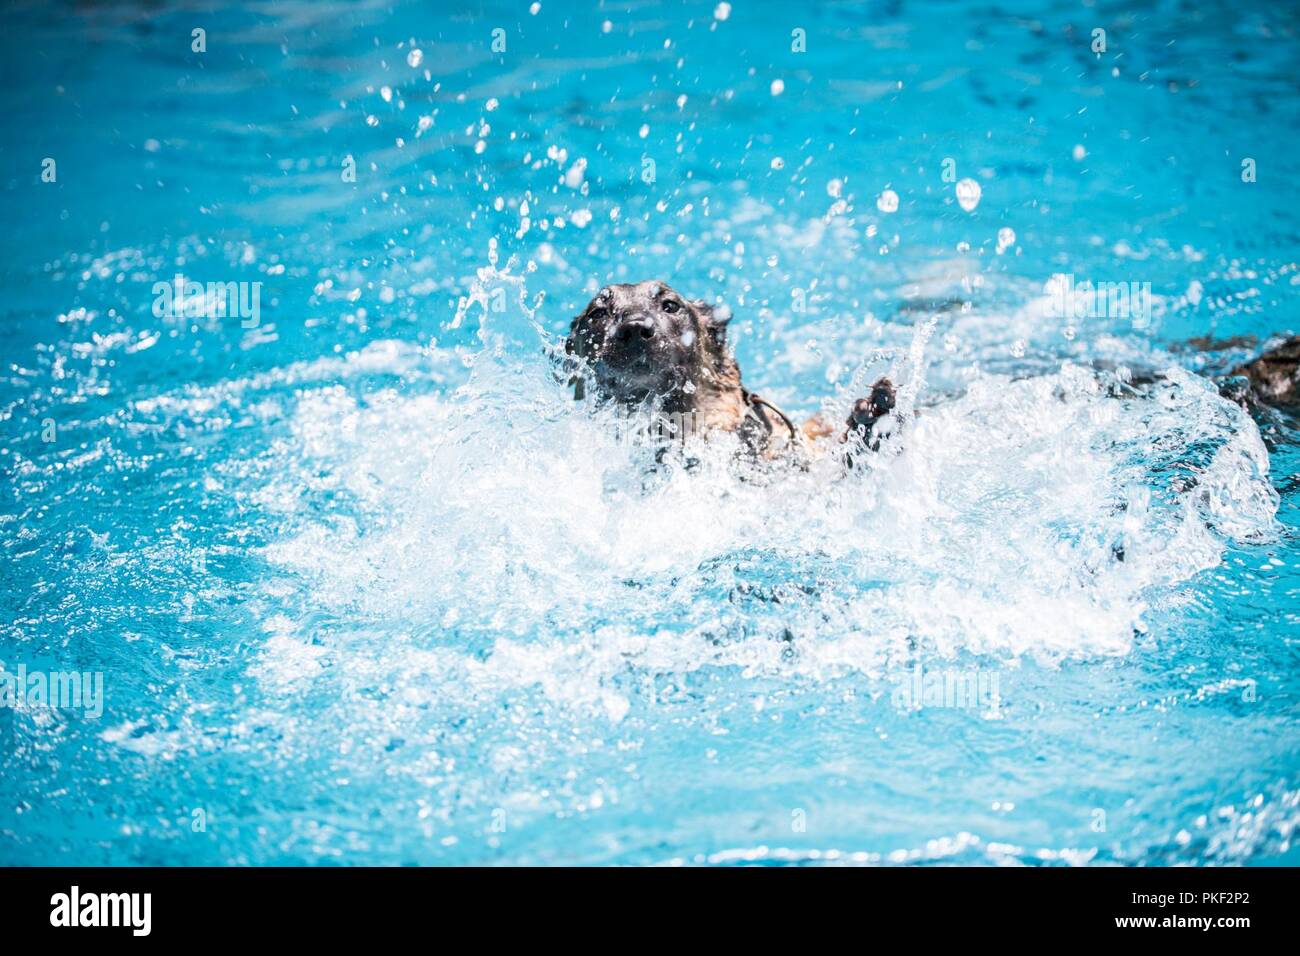 Ppatriot, a 2nd Law Enforcement Battalion military working dog, resurfaces after jumping off the high-dive, in the Area 5 pool at Marine Corps Base Camp Lejeune, N.C., Aug. 3, 2018. 2nd LEB practiced aggression training as part of specialized training to familiarize their dogs with water. The 2nd LEB military working dogs benefit from this particular type of training due to not being exposed to water tactics during initial training periods and become better accustomed to performing duties in atypical situations. Stock Photo